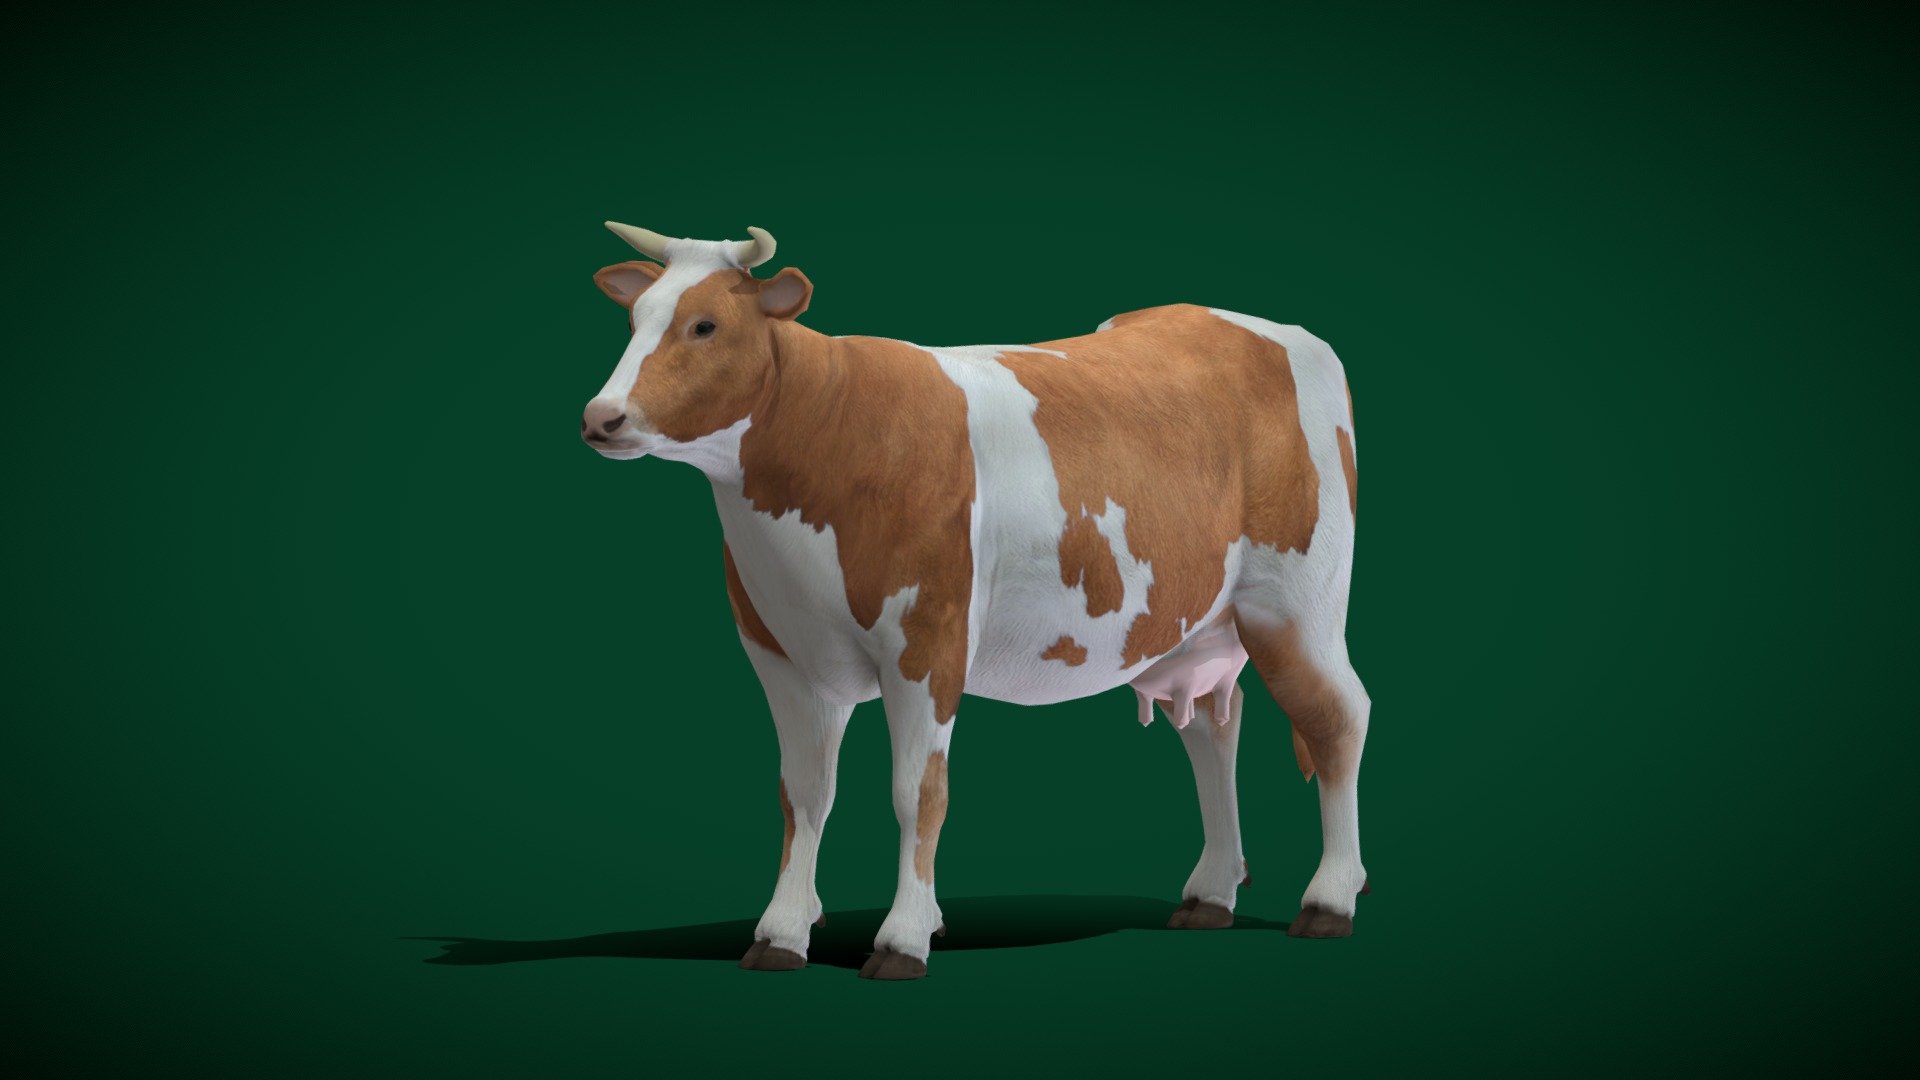 Bos taurus (Milk Cow)

Diary Milk Cow     (Low poly)

1 Draw Calls

GameReady

13 Animations

4K PBR Textures Material

Unreal FBX

Unity FBX  

Blend File 

USDZ File (AR Ready). Real Scale Dimension

Textures Files

GLB File

Gltf File ( Spark AR, Lens Studio(SnapChat) , Effector(Tiktok) , Spline, Play Canvas ) Compatible

Triangles: 6392
Vertices: 3215
Diffuse , Metallic, Roughness , Normal Map ,Specular Map,AO
Dairy cattle are cattle bred for the ability to produce large quantities of milk, from which dairy products are made. Dairy cattle generally are of the species Bos taurus.. They are prominent modern members of the subfamily Bovinae and the most widespread species of the genus Bos. Mature female cattle are referred to as cows and mature male cattle are referred to as bulls. Wikipedia
Mass: 1,100 kg (Male, Adult, Bull), 720 kg (Female, Adult, Cow)
Wikimedia Foundation
Mass: Ayrshire cattle: 640 – 900 kgLower classifications: Zebu - Diary Cattle  (Lowpoly) - Buy Royalty Free 3D model by Nyilonelycompany 3d model